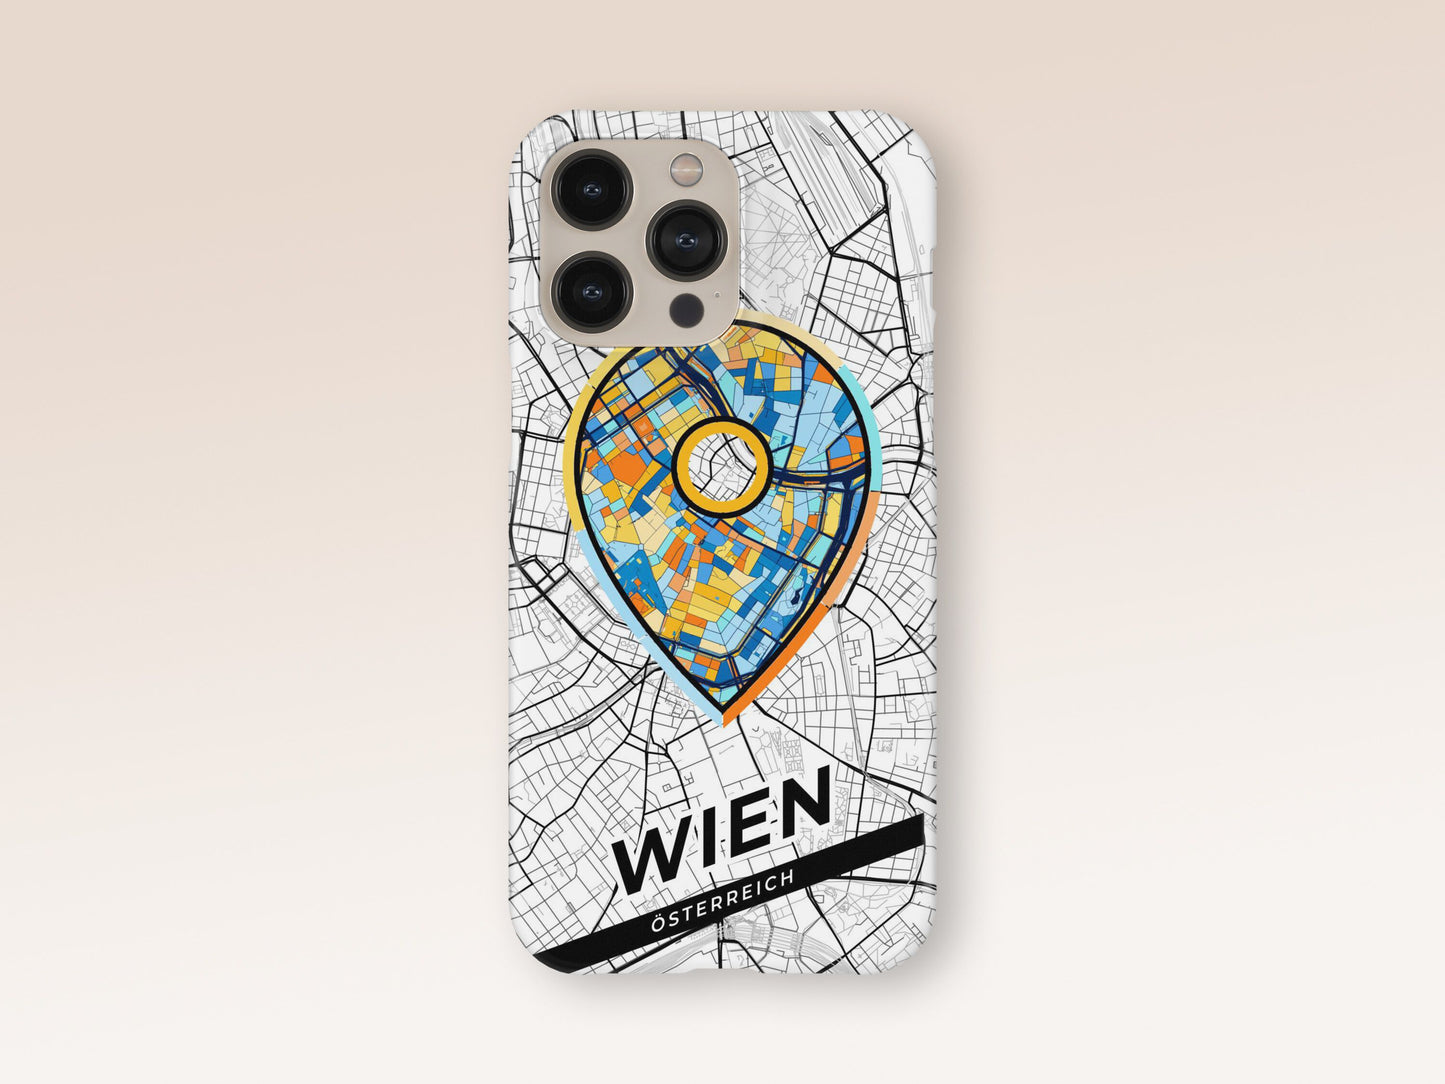 Wien Österreich slim phone case with colorful icon 1